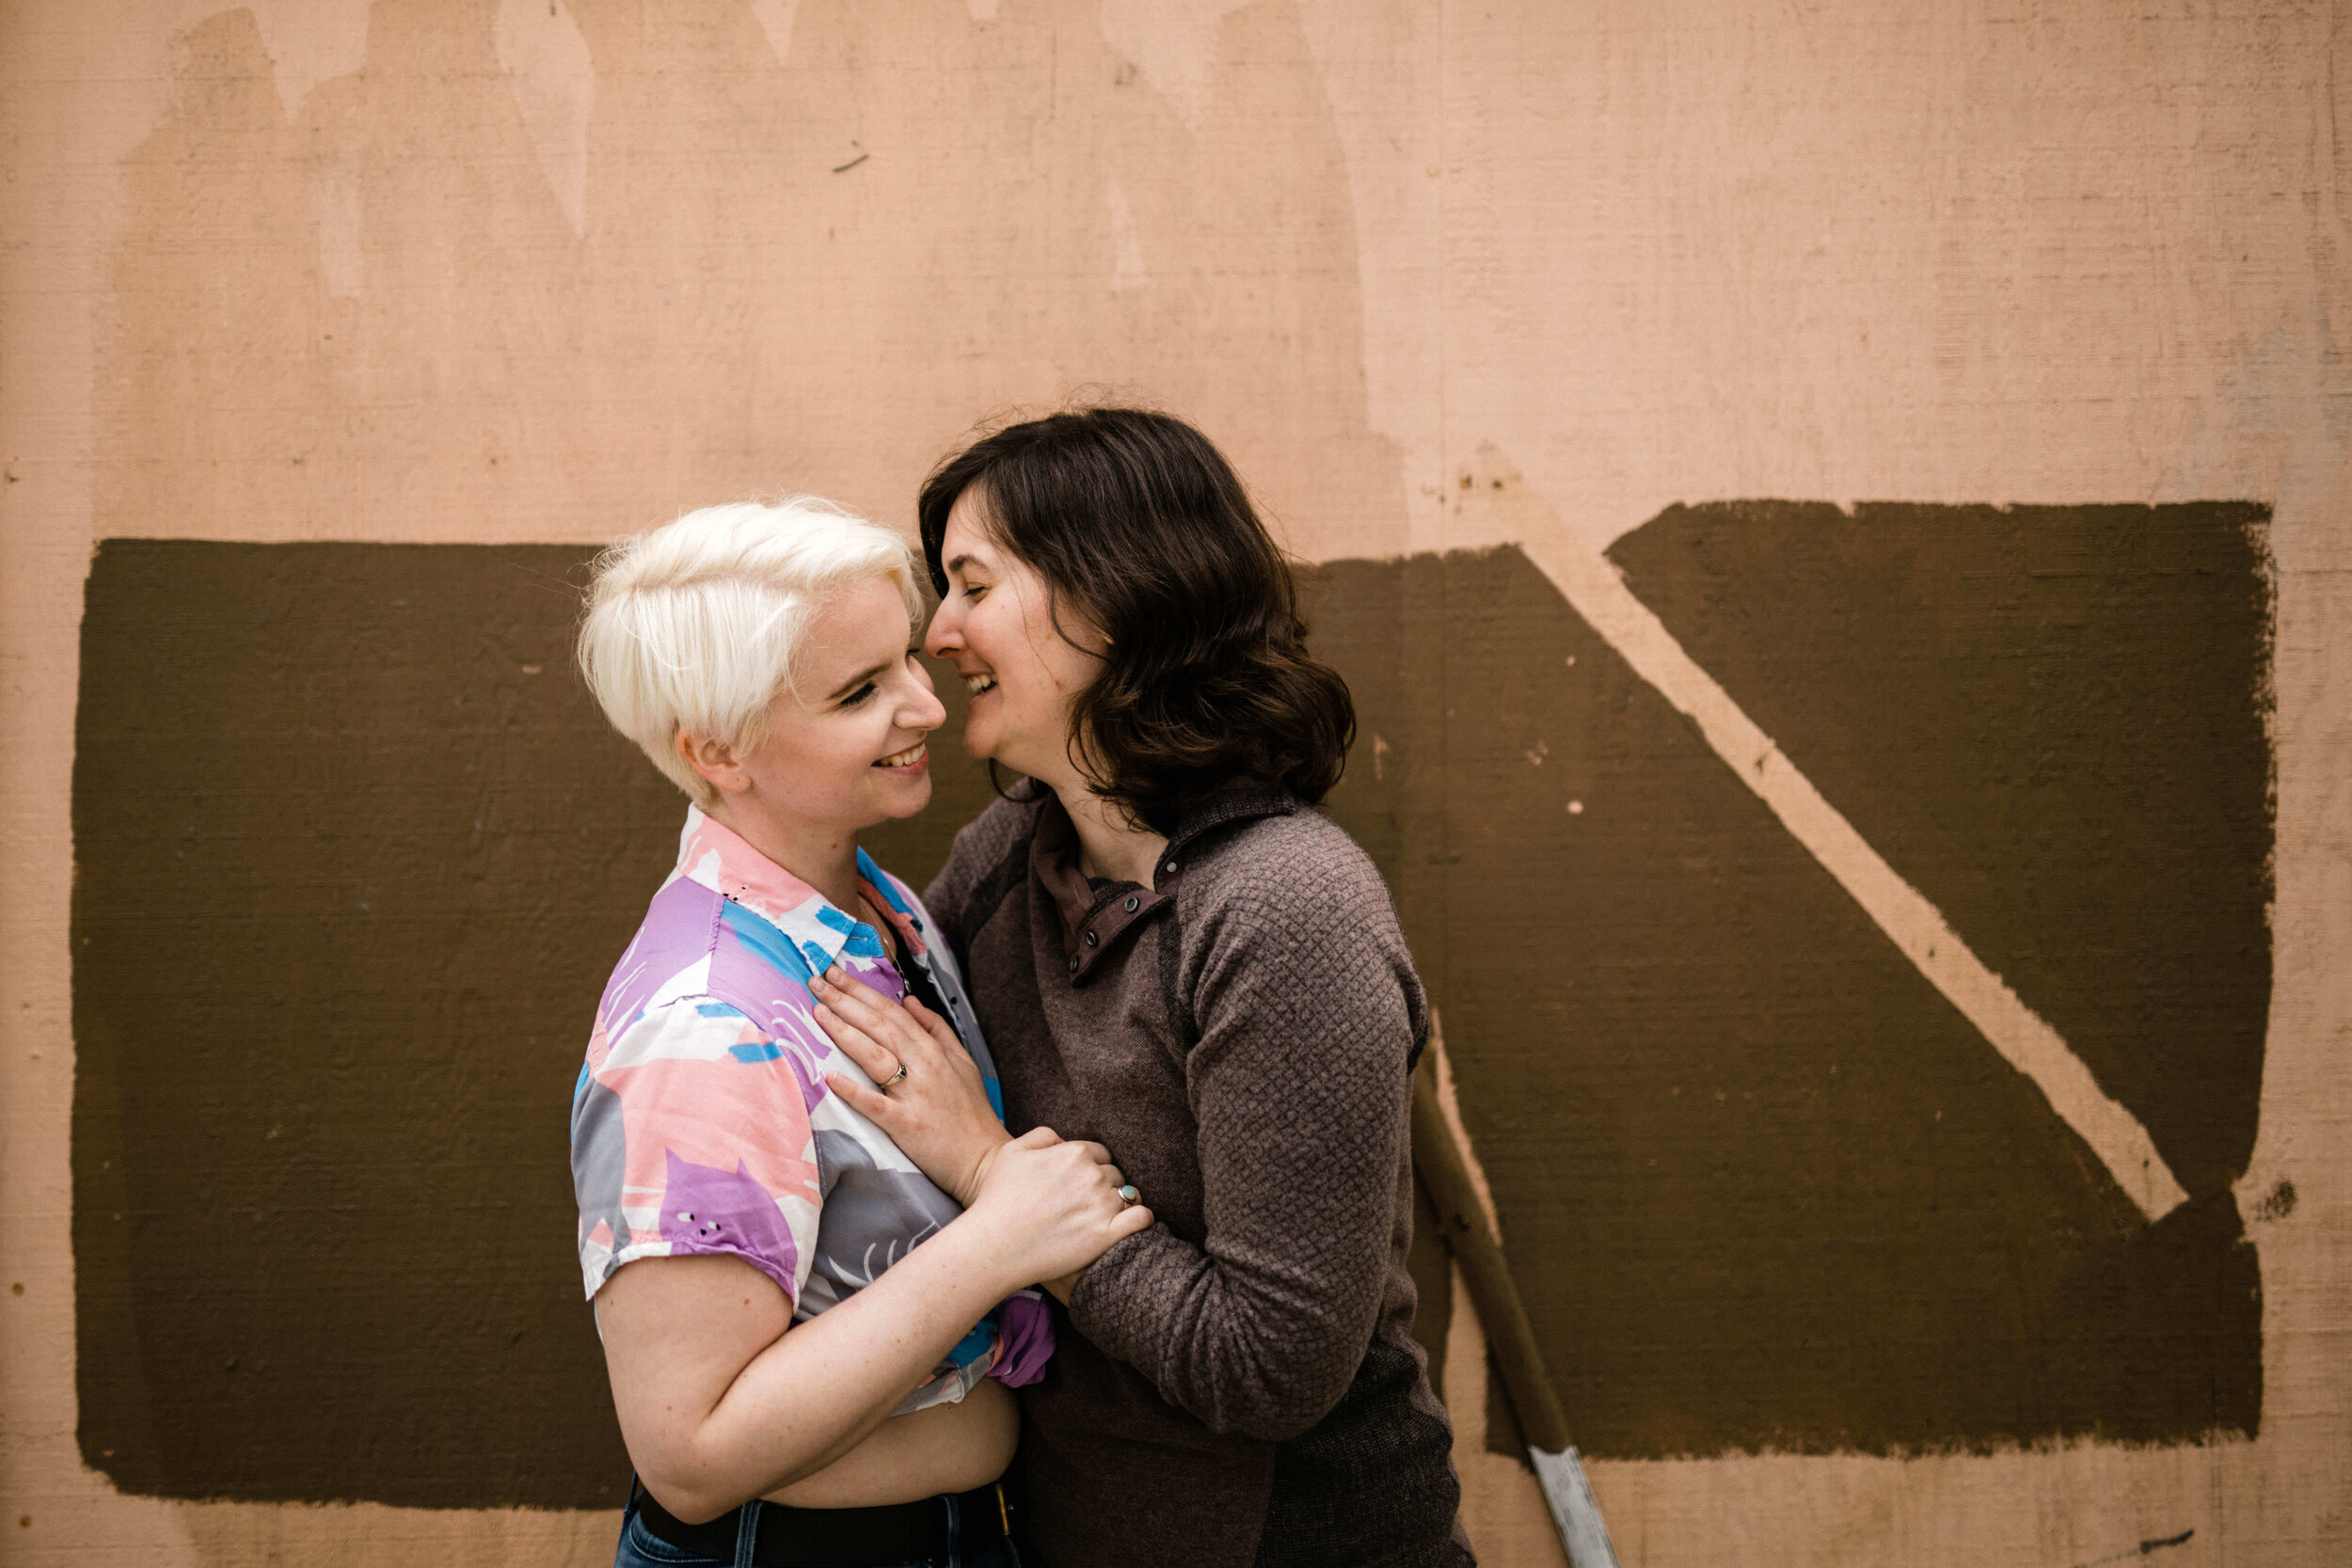 Engaged queer couple smiling and embracing by a brown painted rectangle Shawnee Custalow DC Wedding Photographer